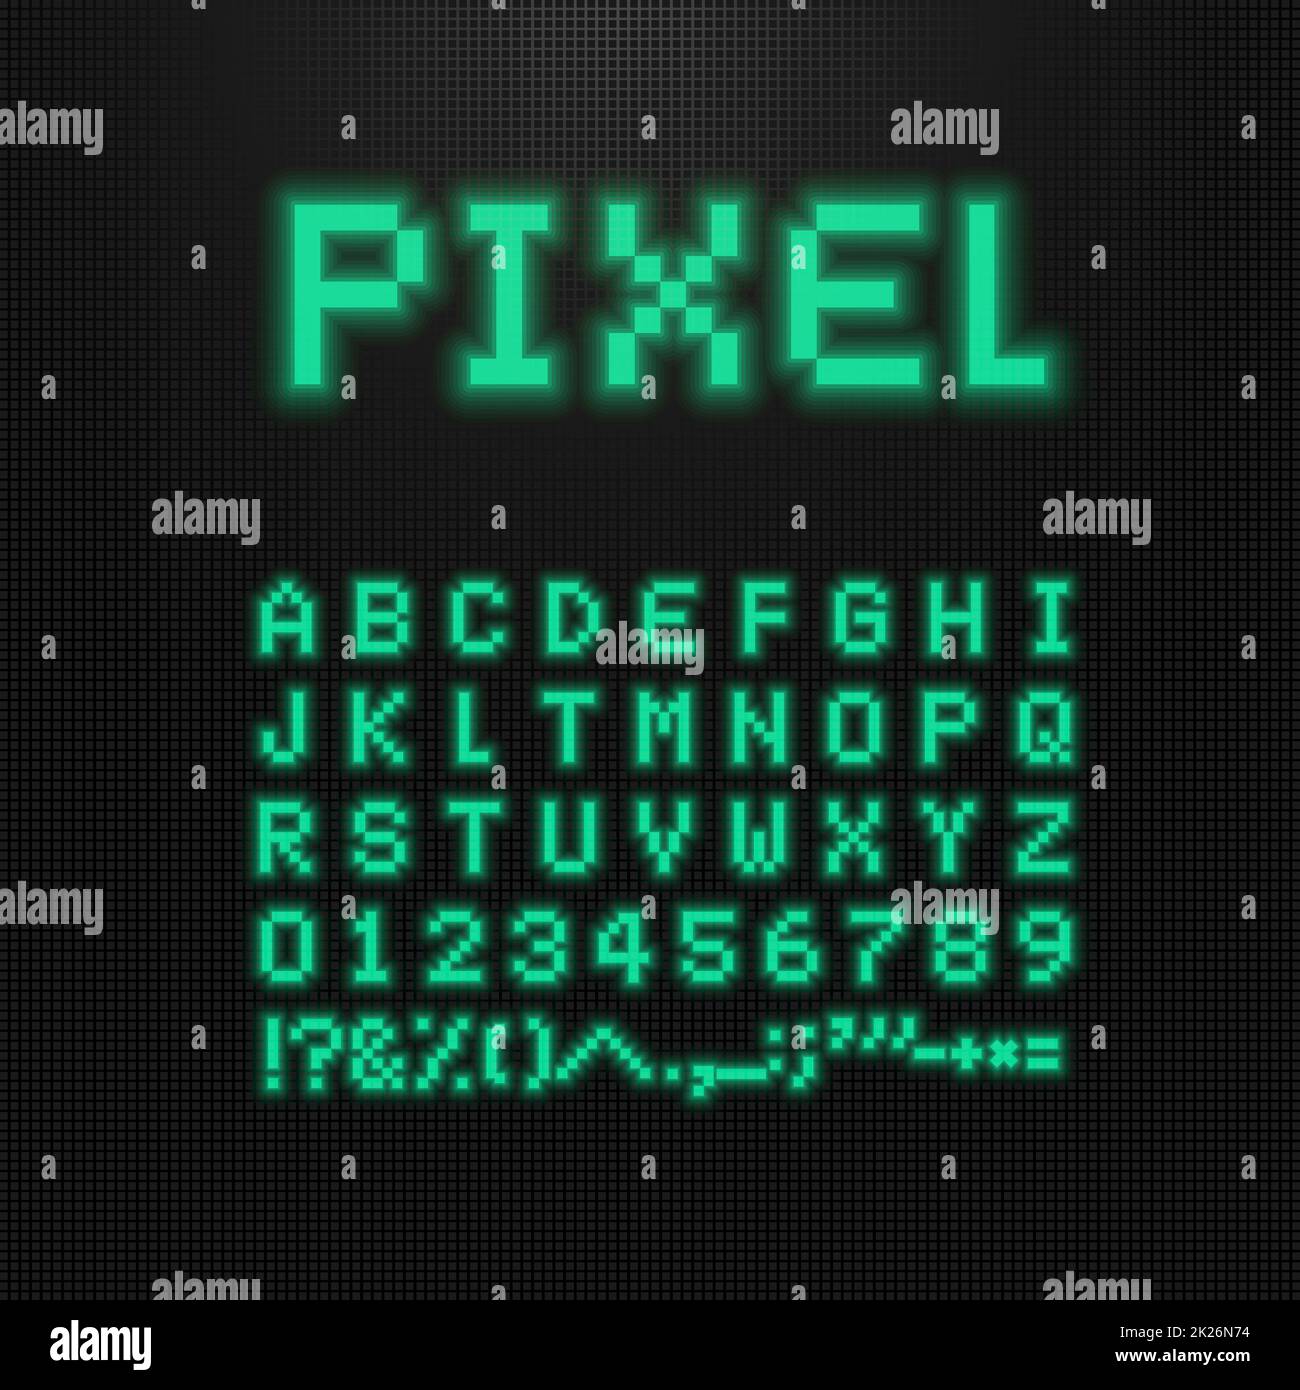 Pixel font, vector letters, numbers and signs on old computer led display. 8 bit video game typeface. Retro digital abc. Green points letters on black background. Stock Photo